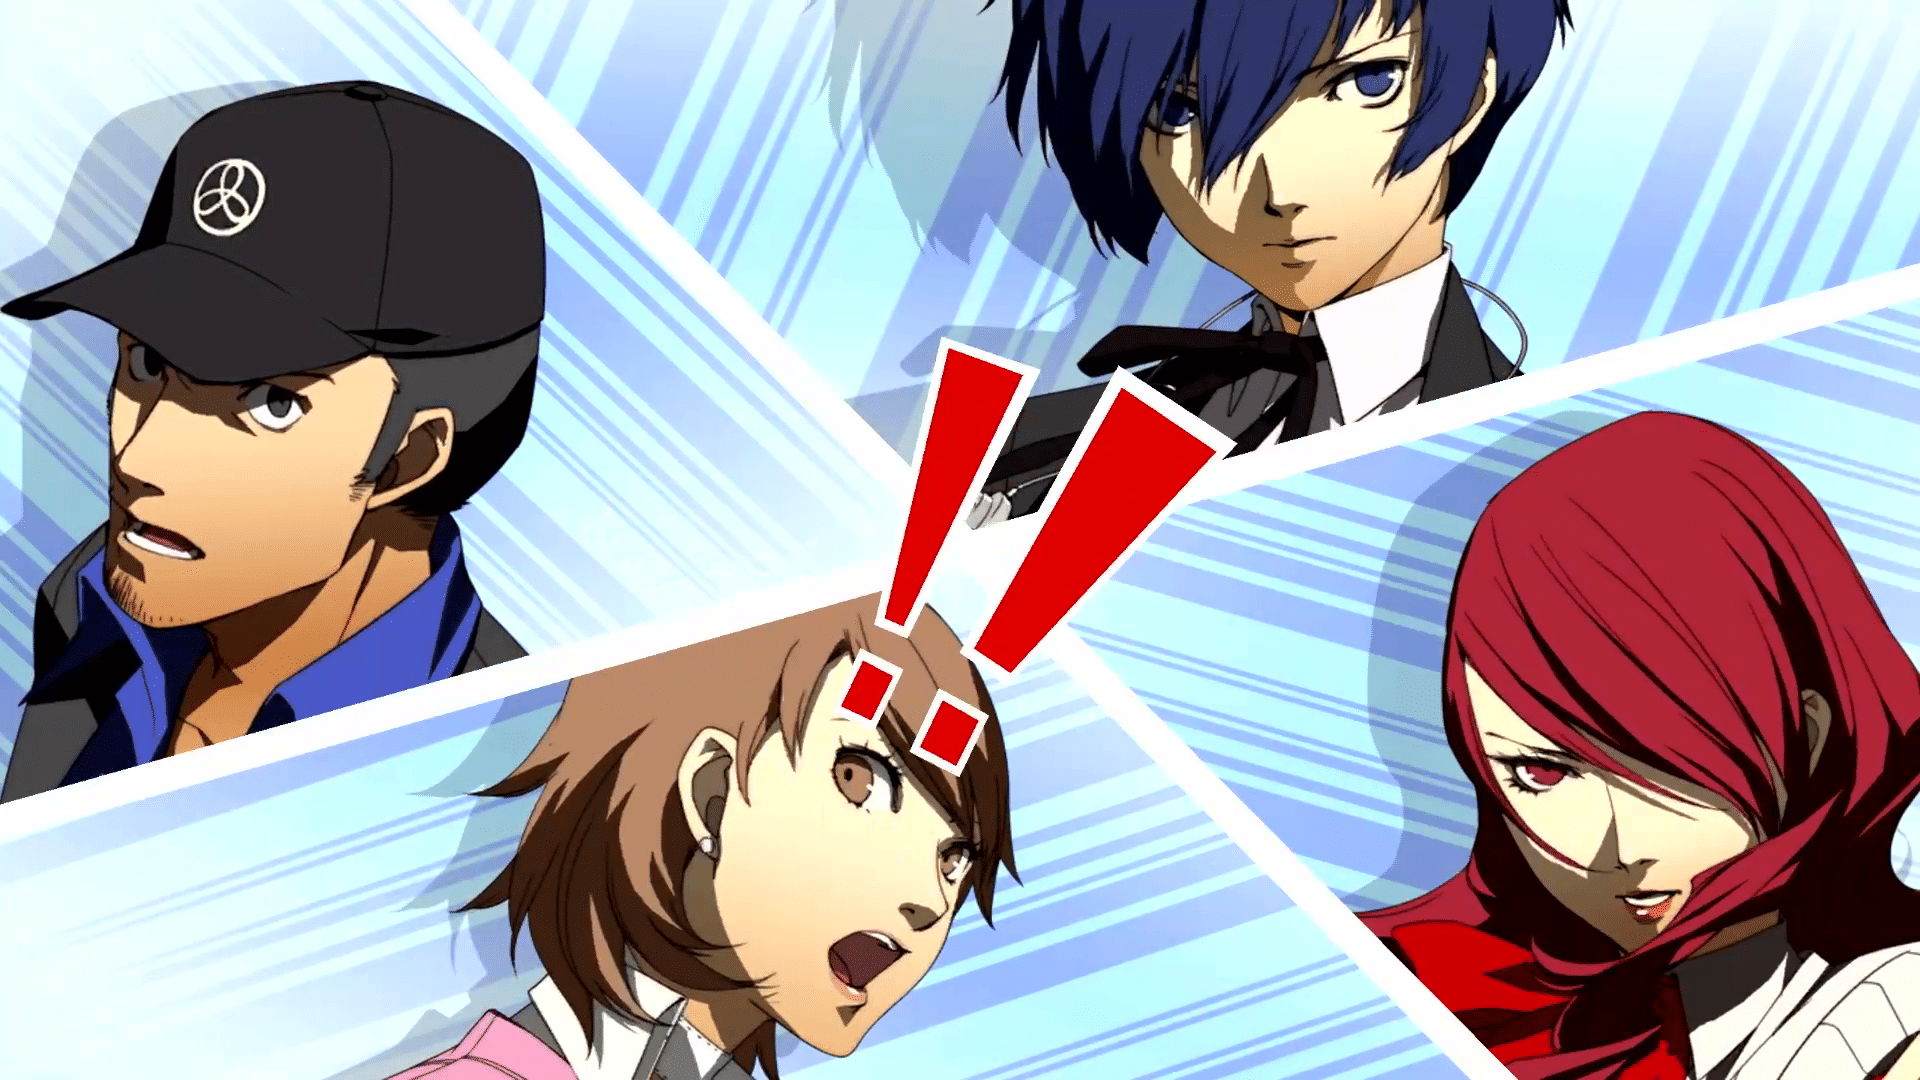 Persona 3 Portable & Persona 4 Golden Launching January 19, 2023; Screenshots, Quality of Life Updates & Trailer